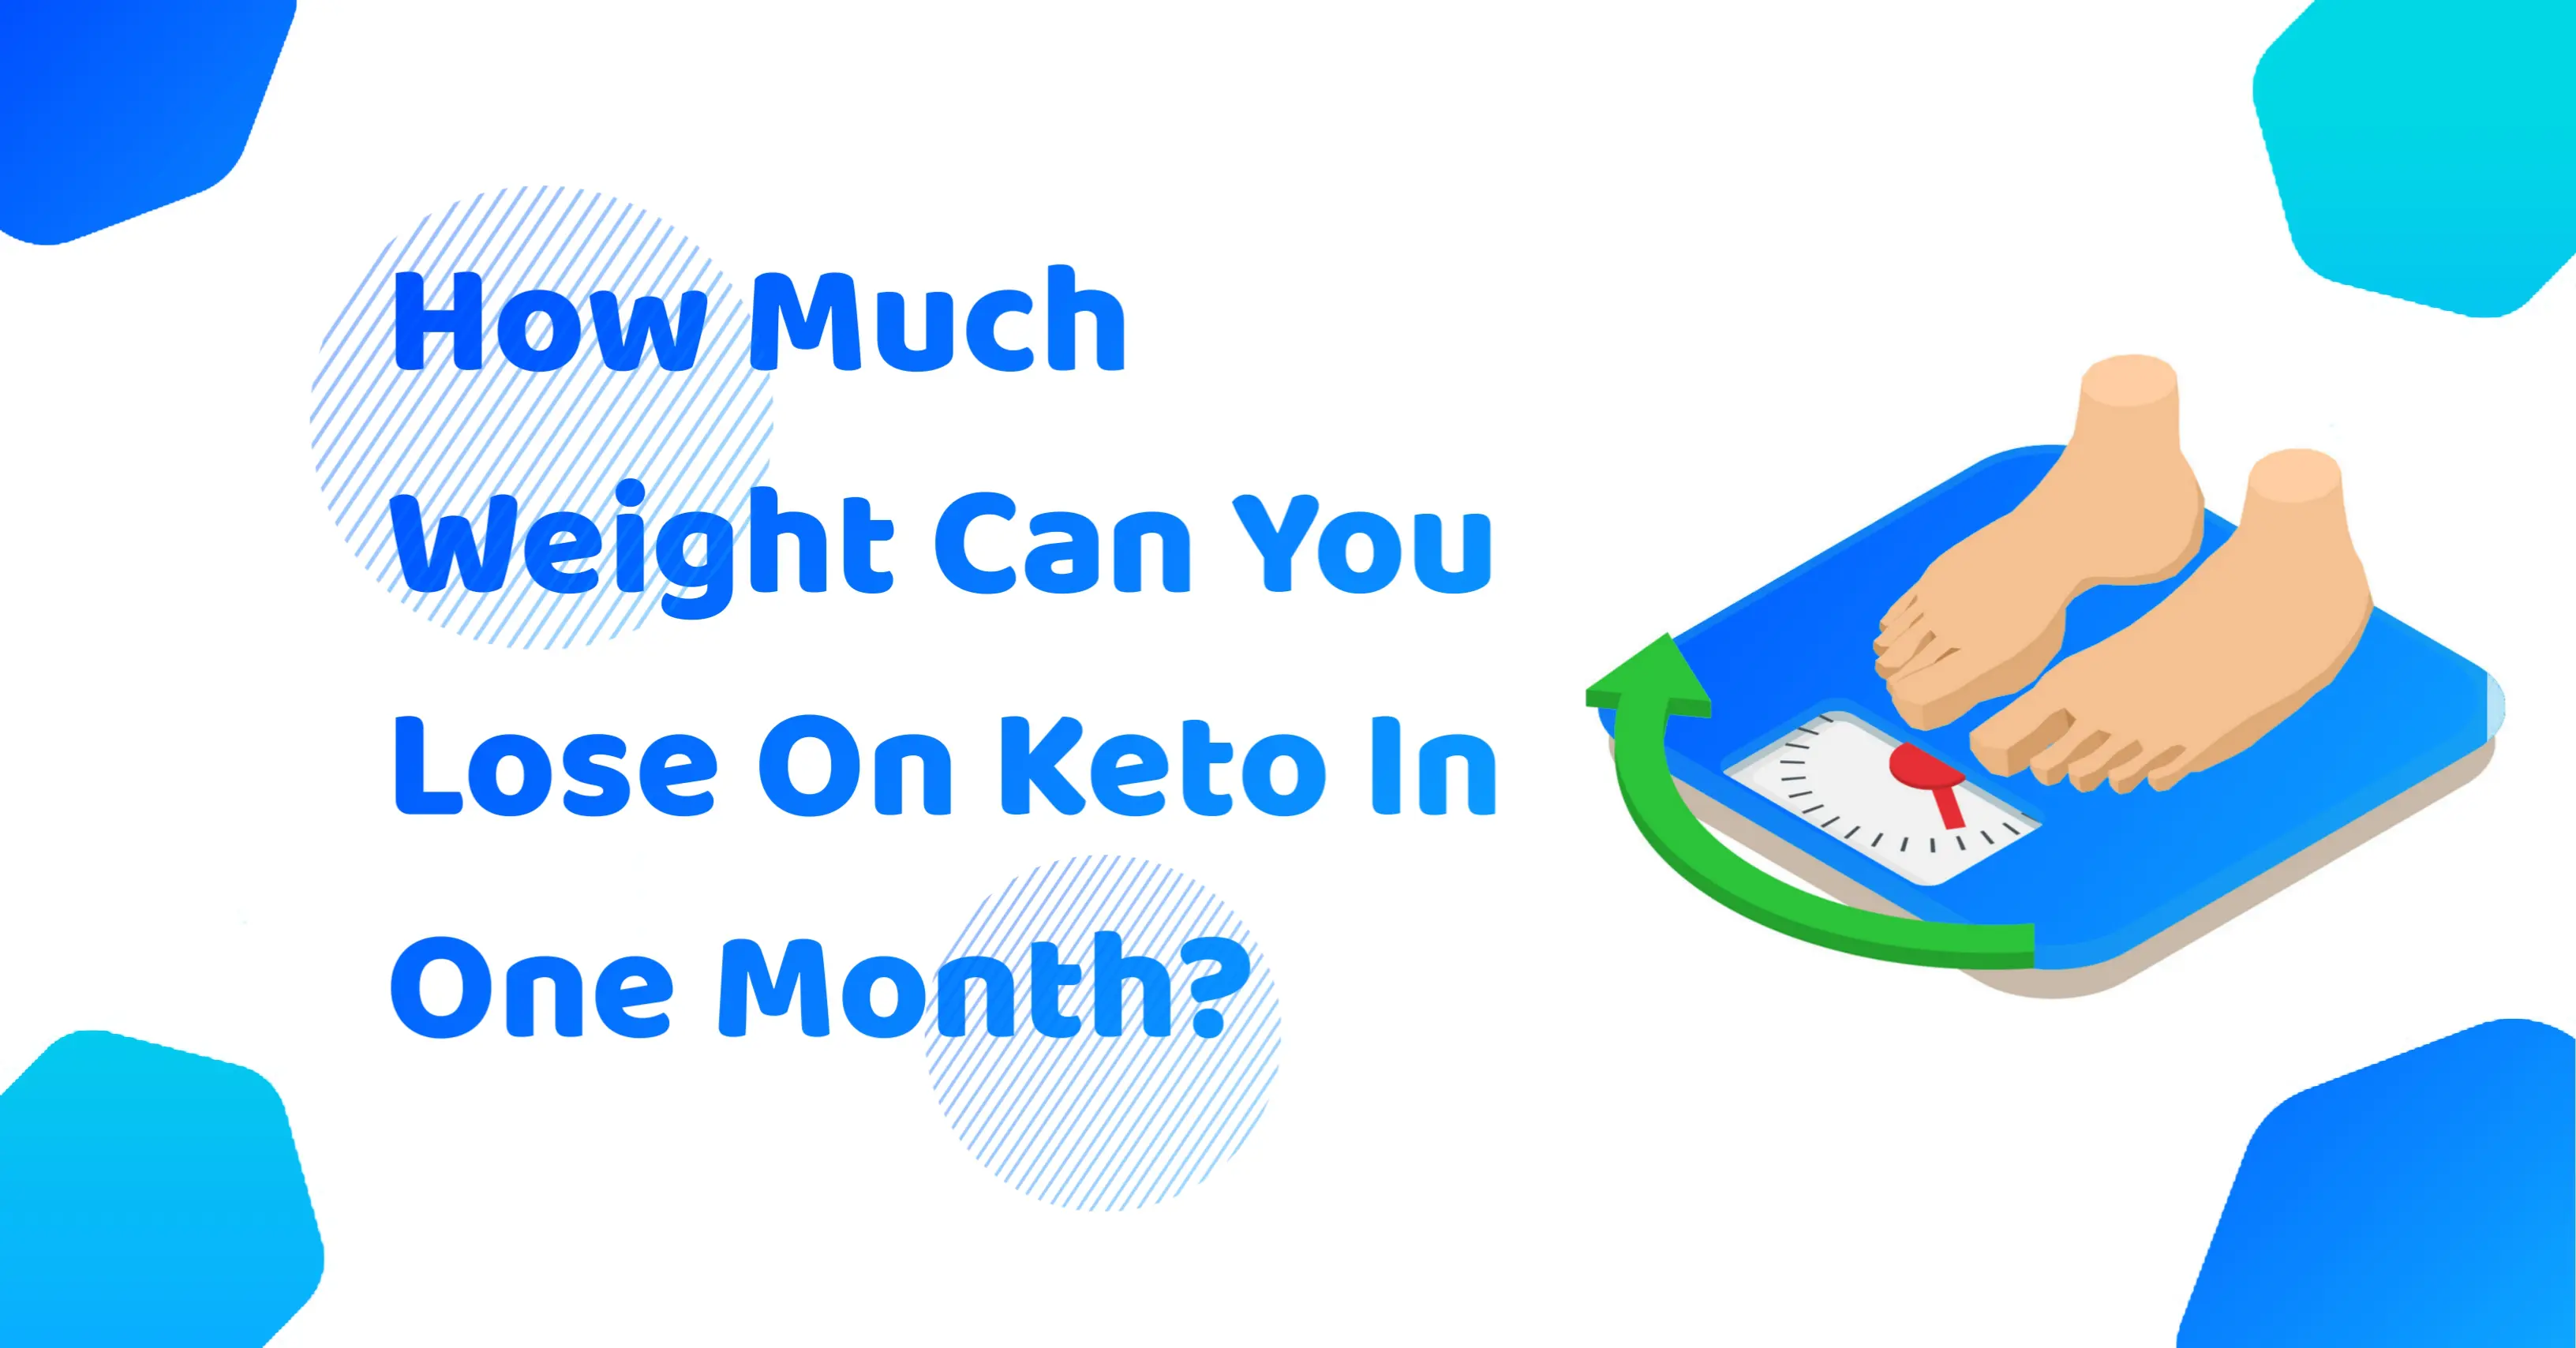 How Much Weight Can You Lose On Keto In One Month?